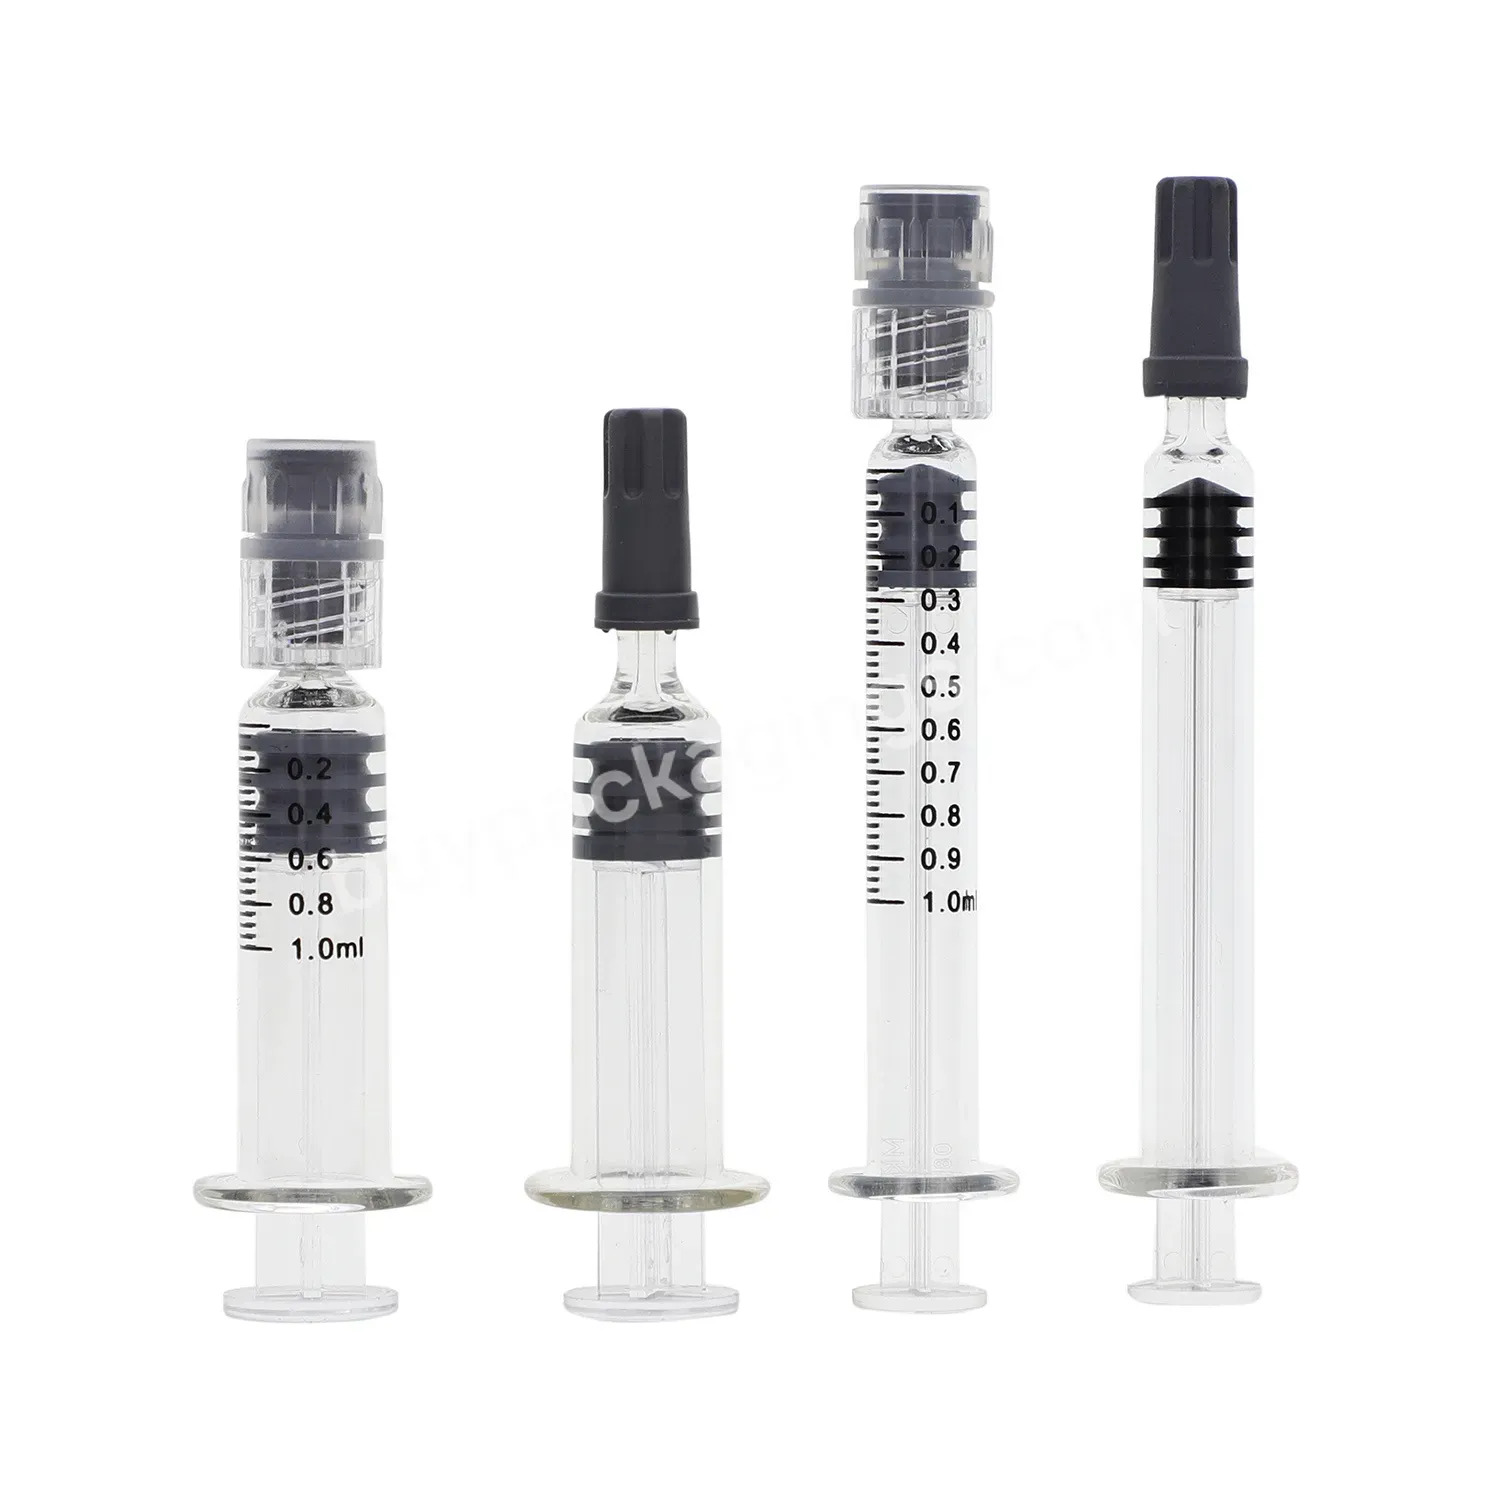 Concentrates Remain Fresh Airtight Included Luer Lock Cap Reusable Borosilicate Heat Shock Resistance Glass Syringes - Buy 1 Ml Glass Syringe 1 Ml Luer Lock 1ml Luer Lock Syringes Glass Syringe,Glass Syringe 1ml 2ml 5ml 10ml Glass Syringe With Luer L